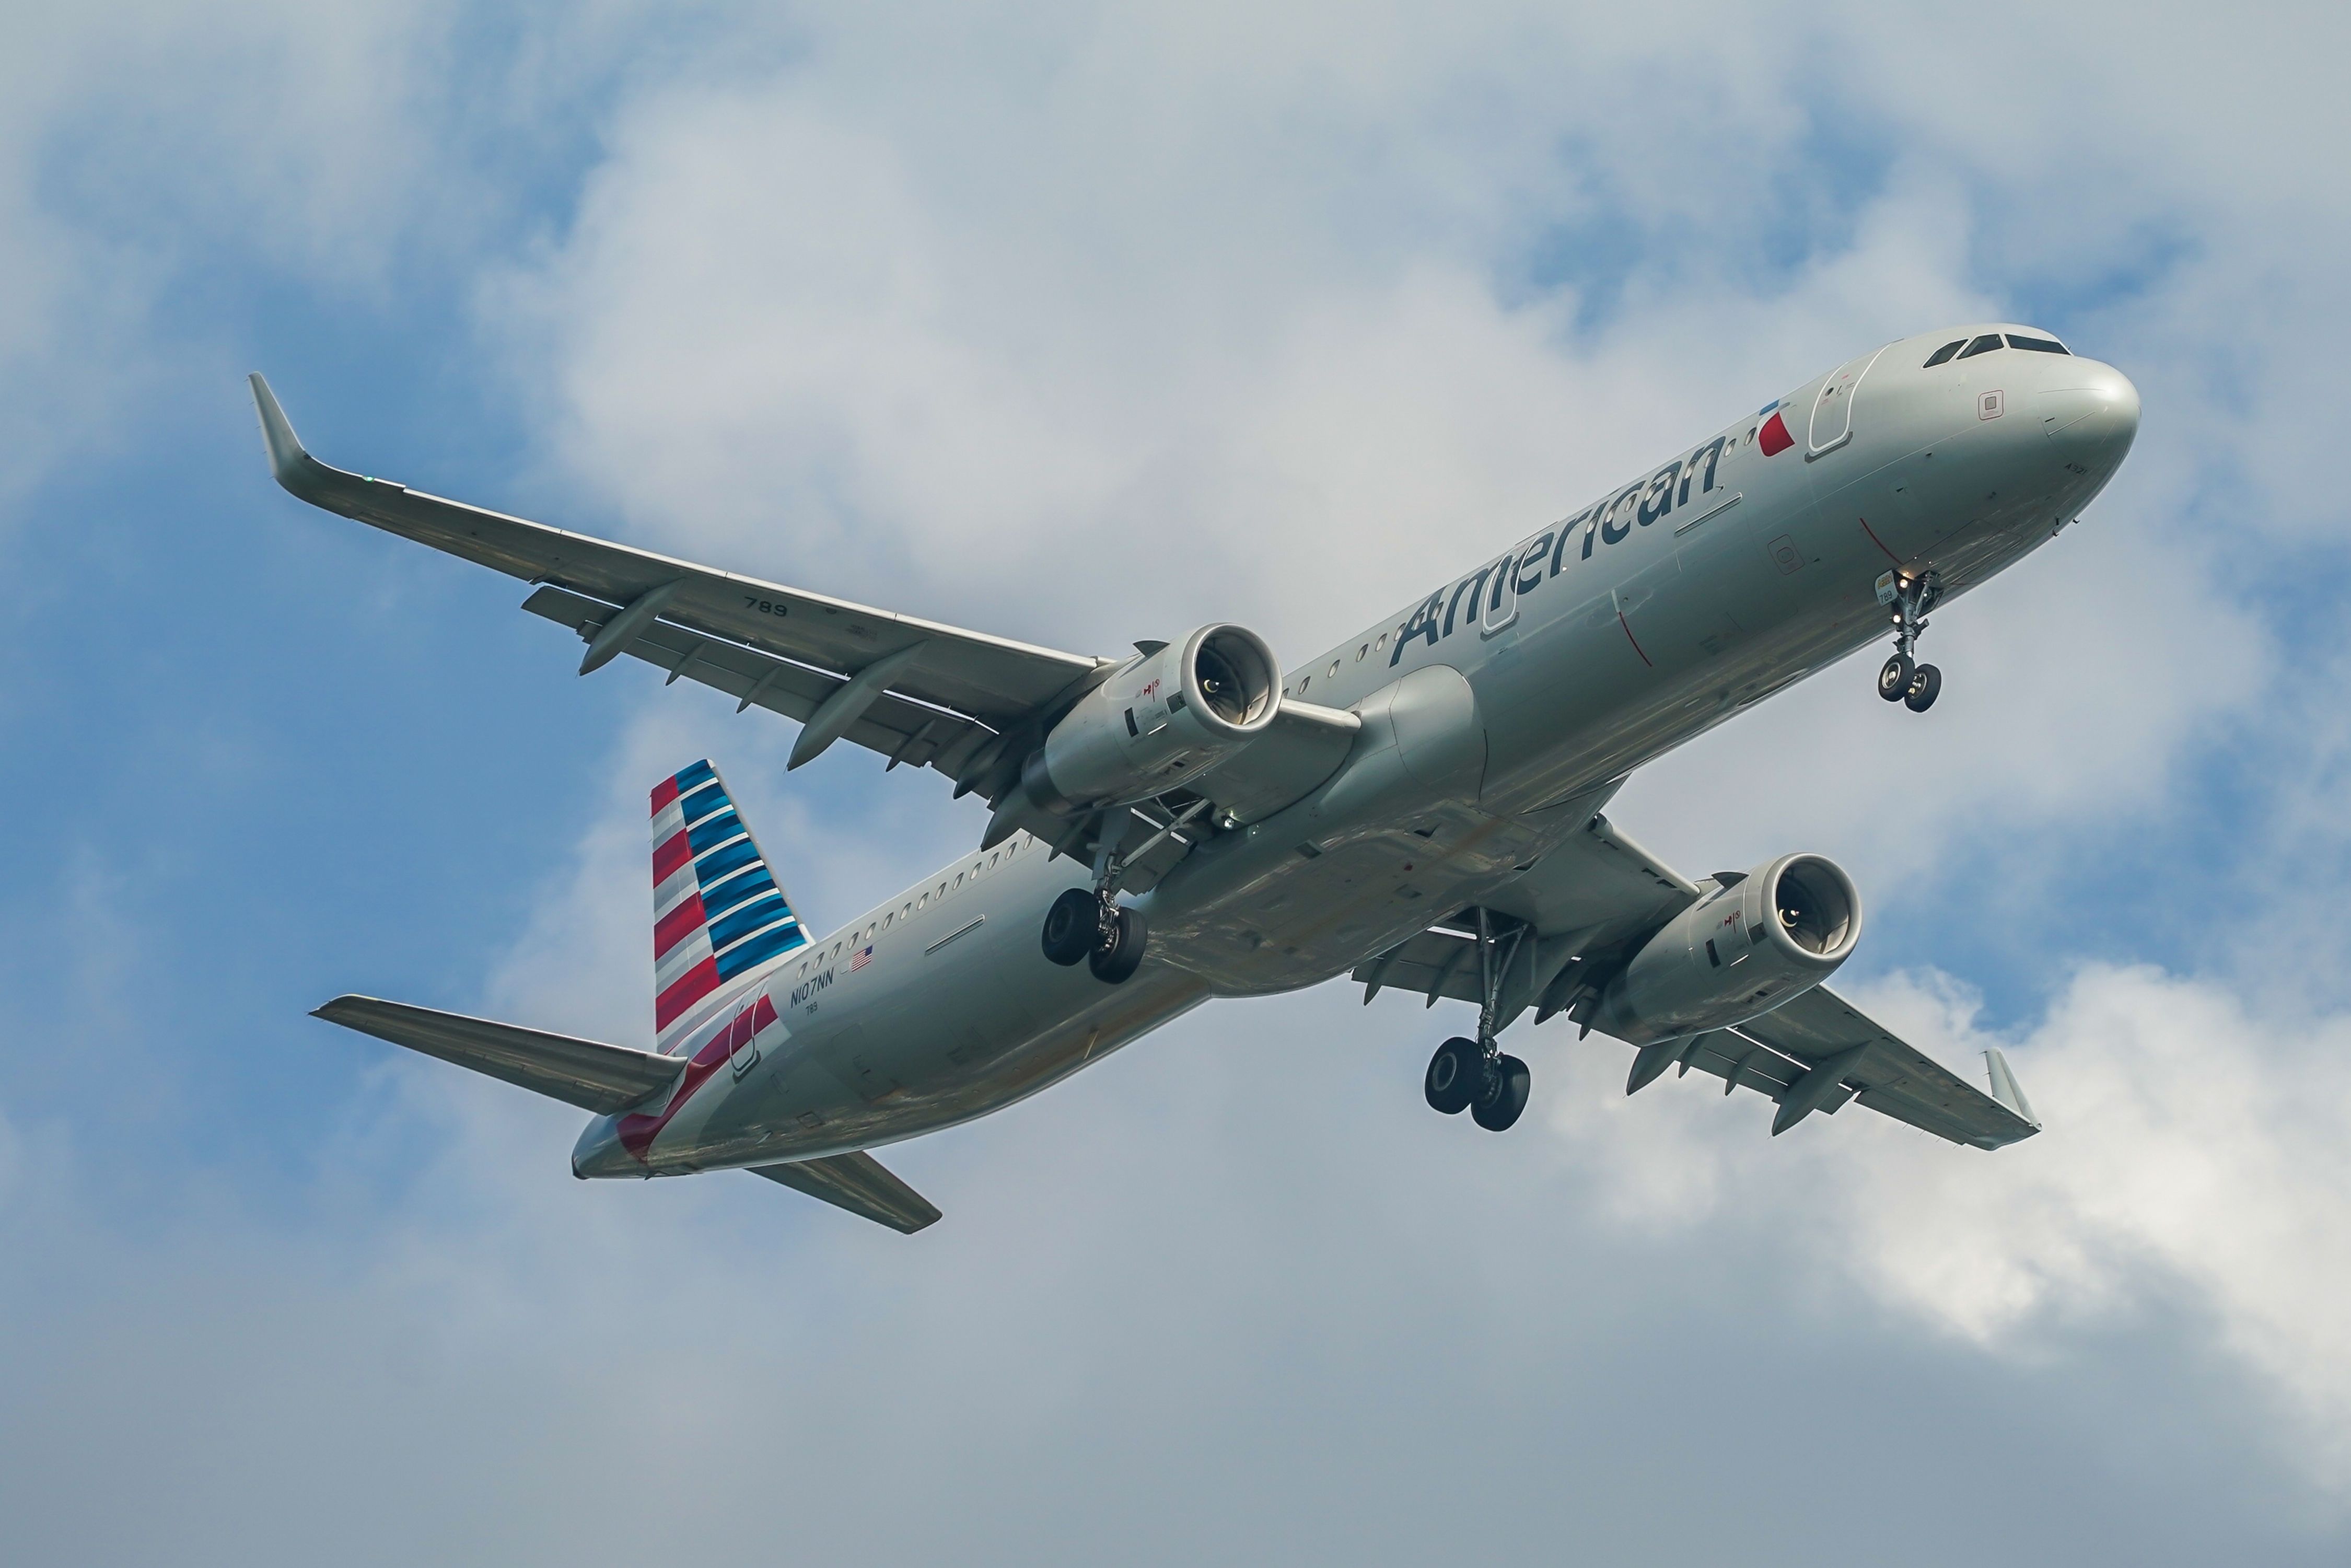 American Airlines Airbus A321 descending for landing at JFK International Airport in New York